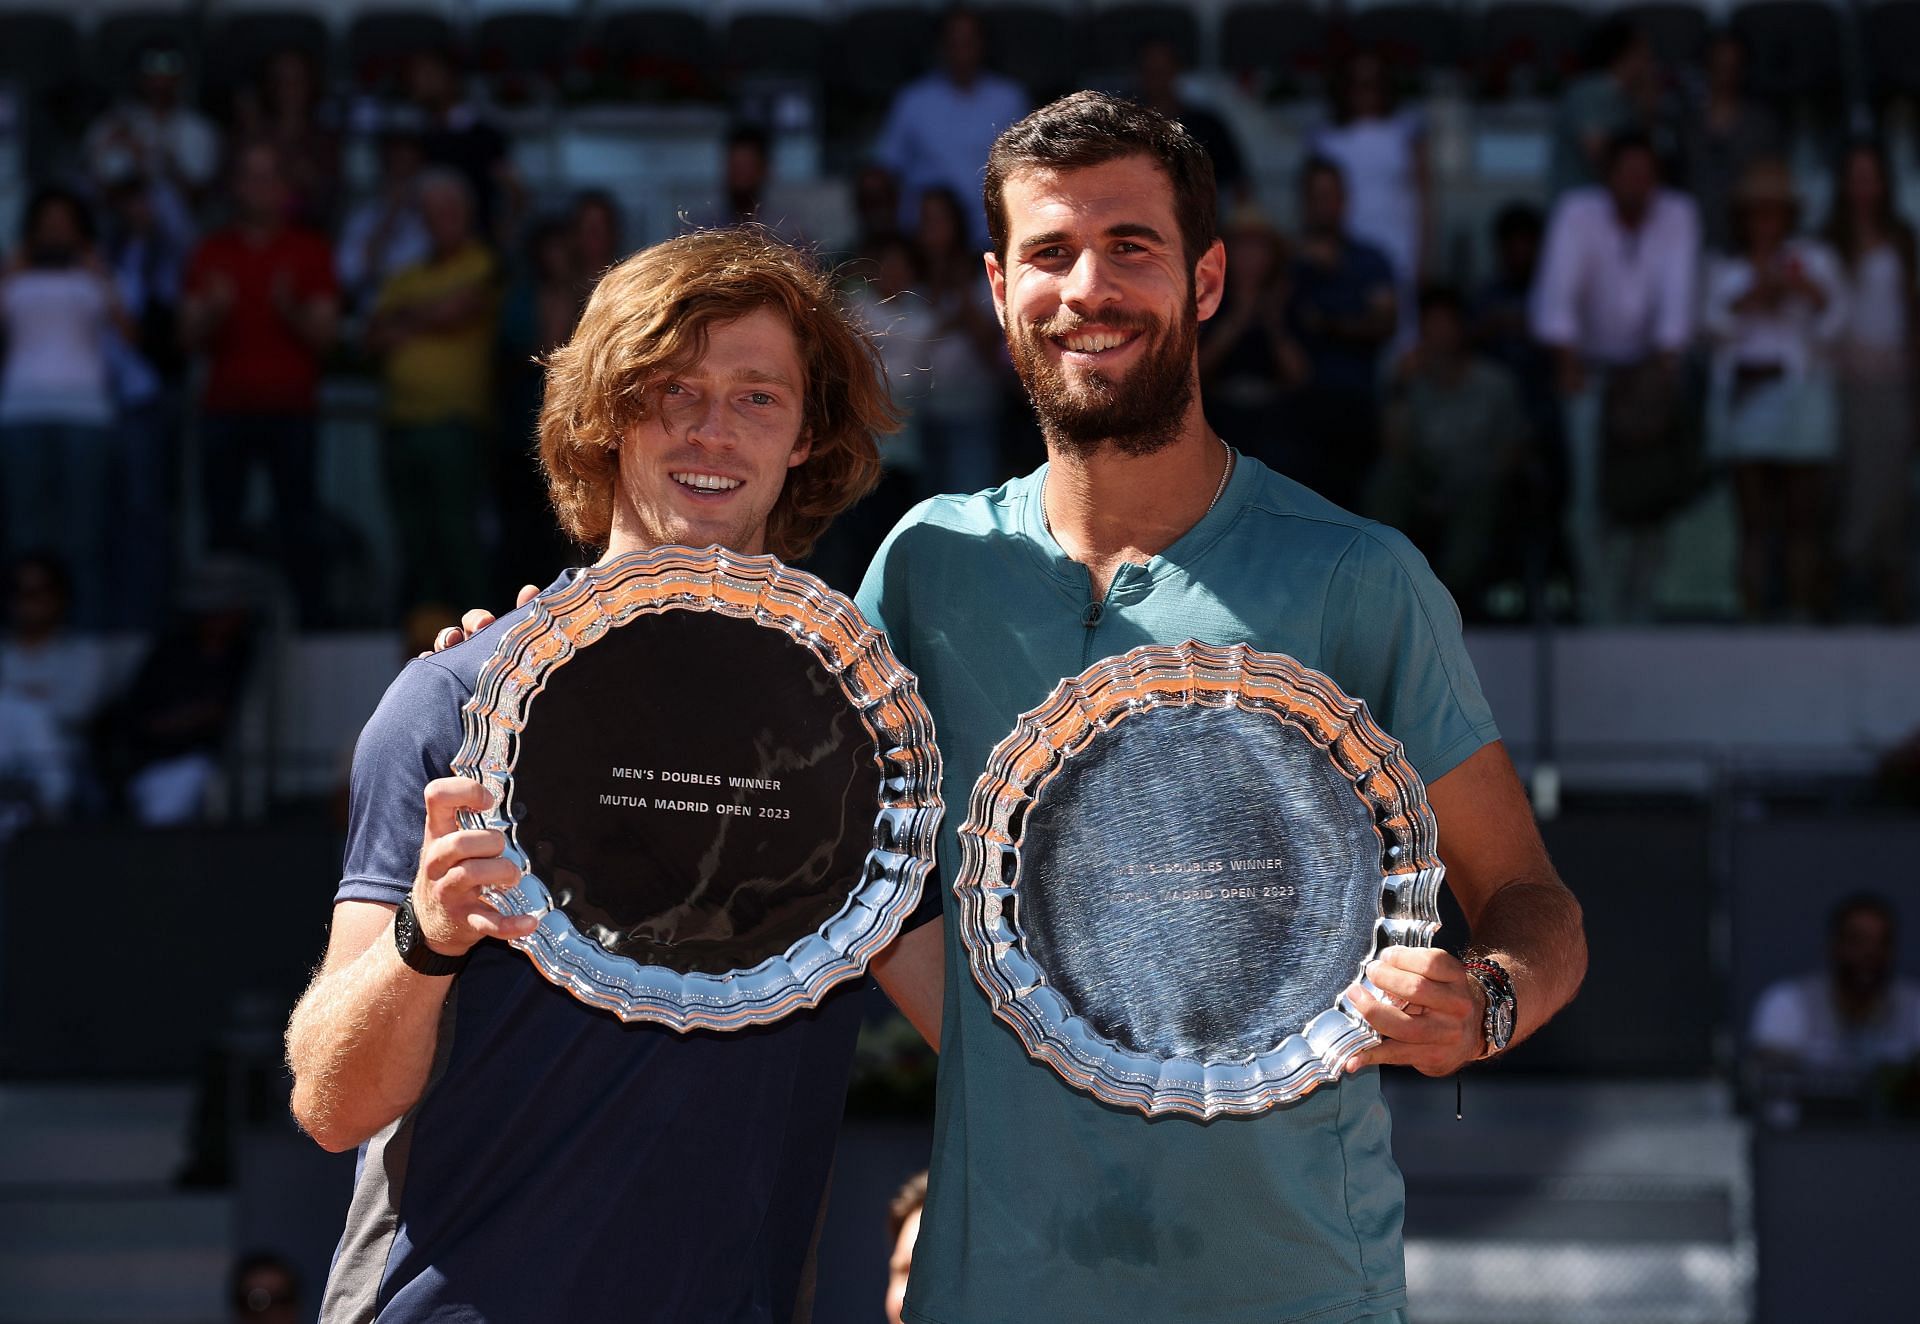 Andrey Rublev & Karen Khachanov come together to play exhibition match at UCLA tennis centre in Los Angeles to help Artsakh refugees